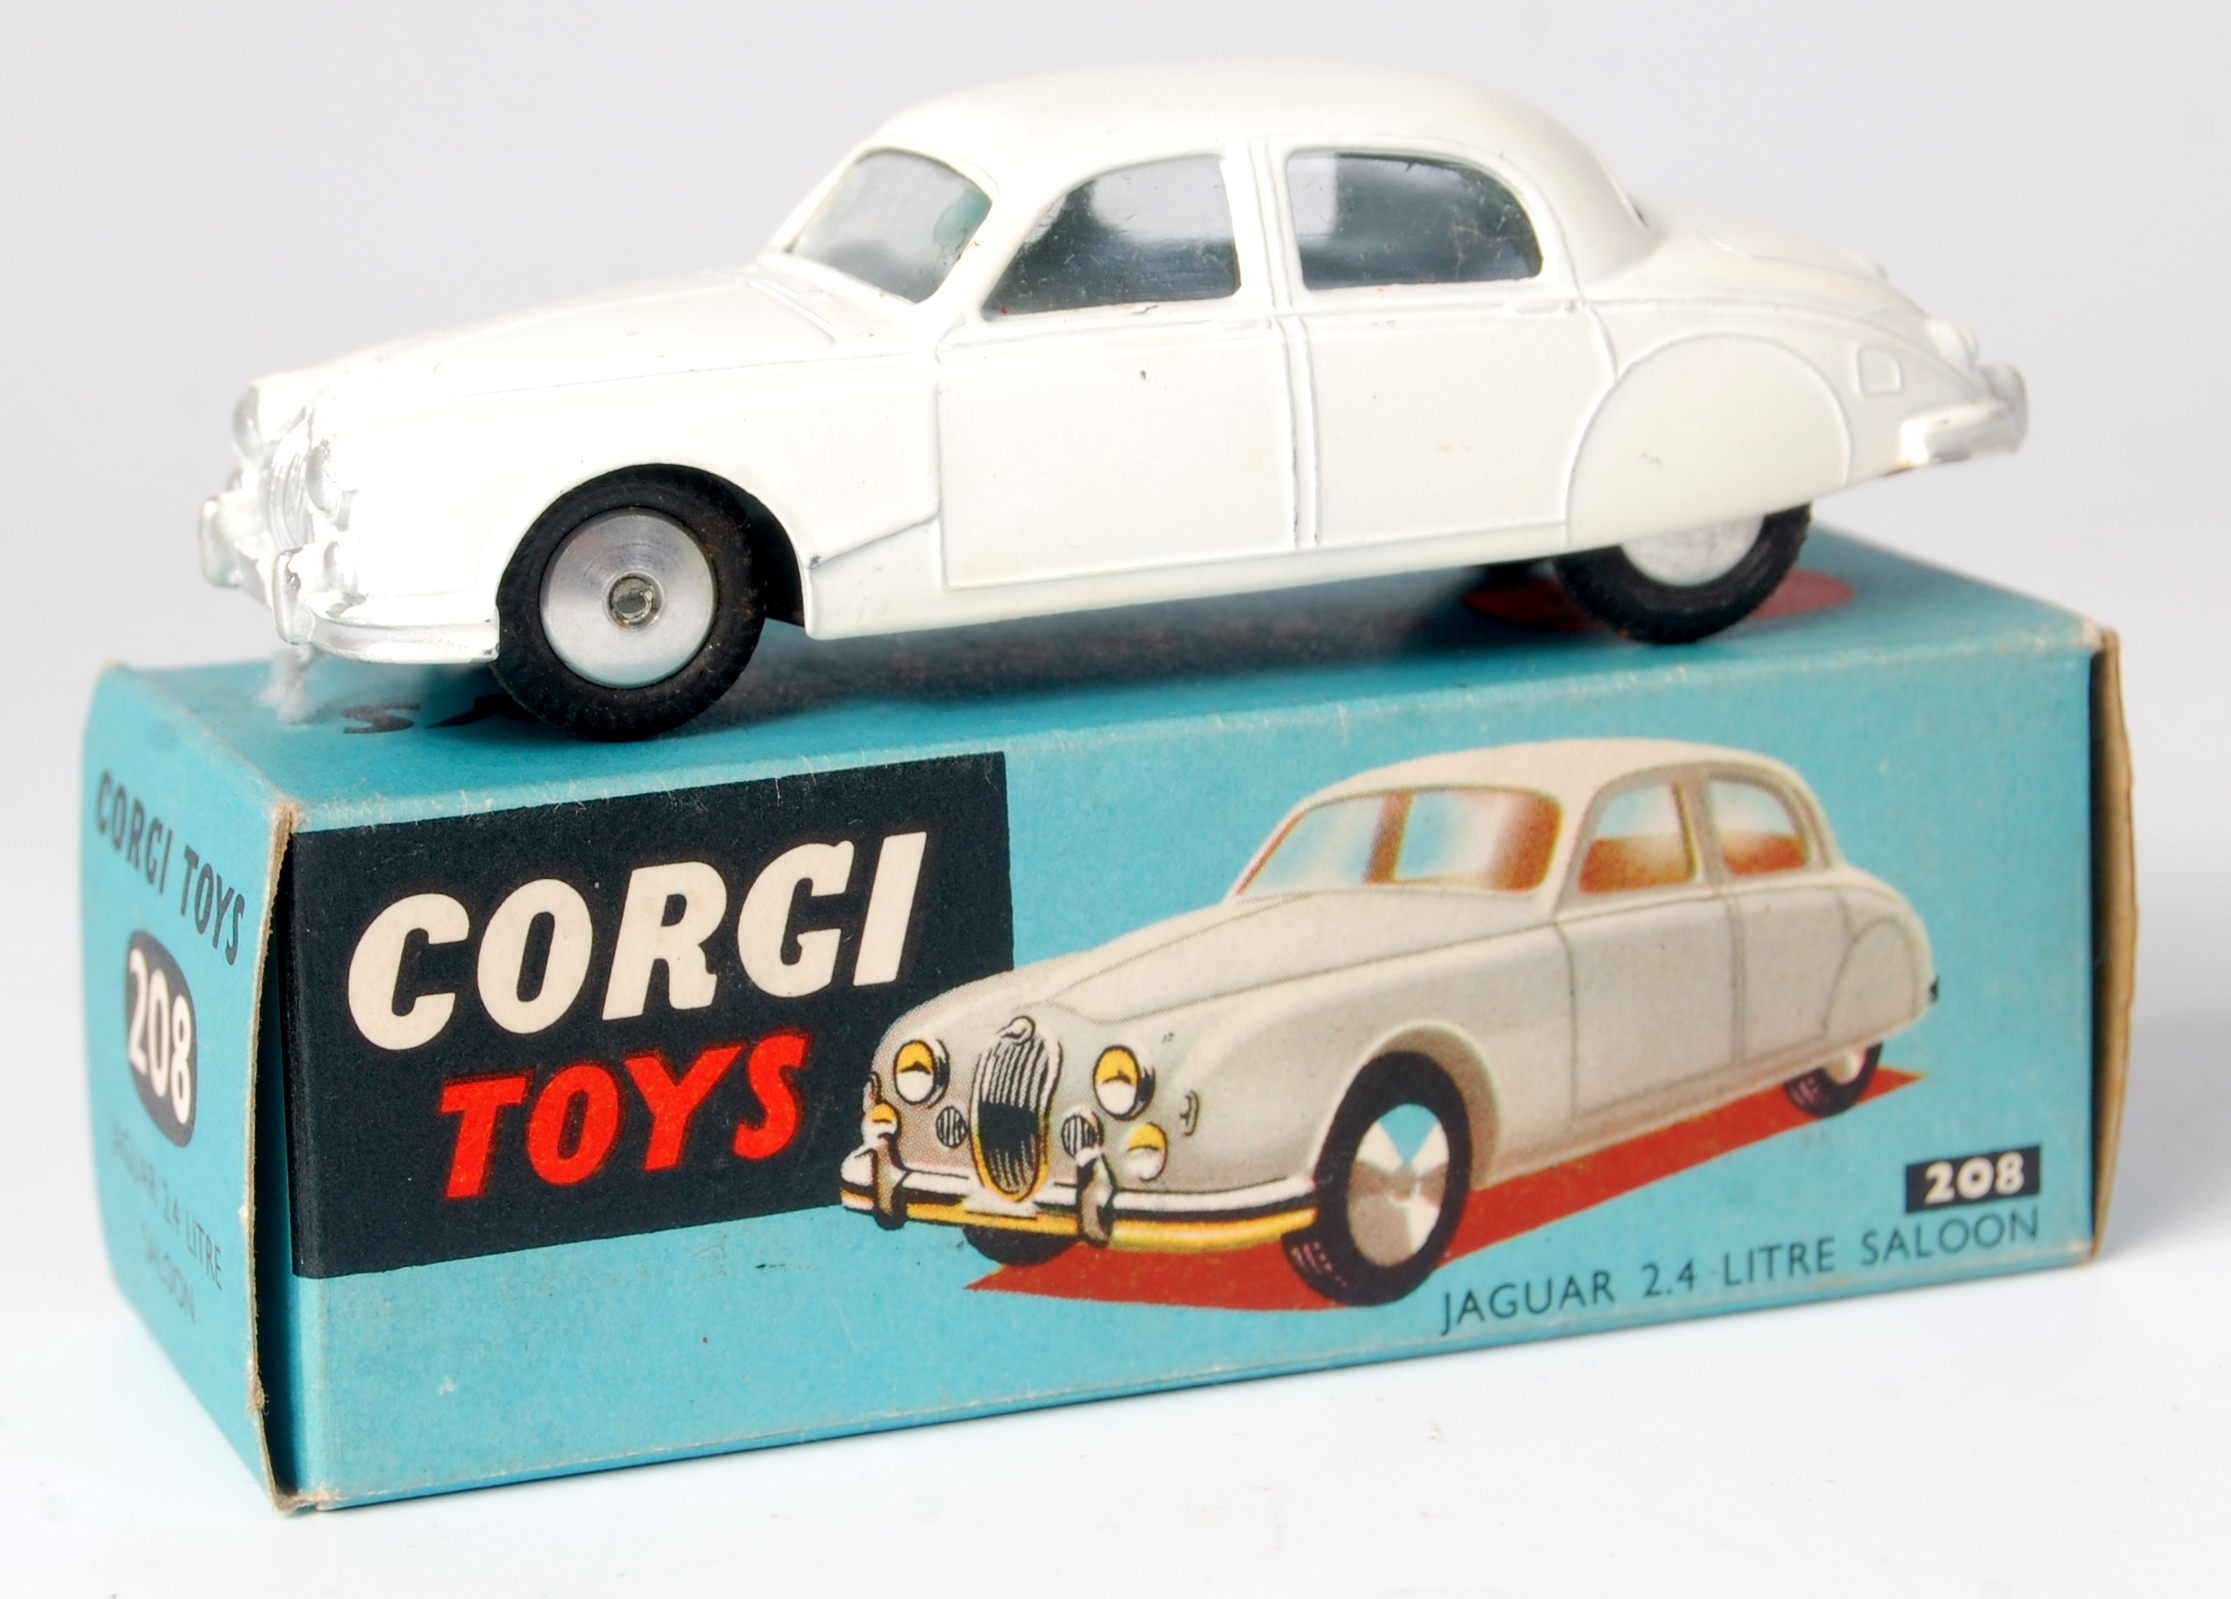 Corgi Toys, 208 Jaguar 2.4 litre, white body with silver detailing, flat spun hubs with glazing, in